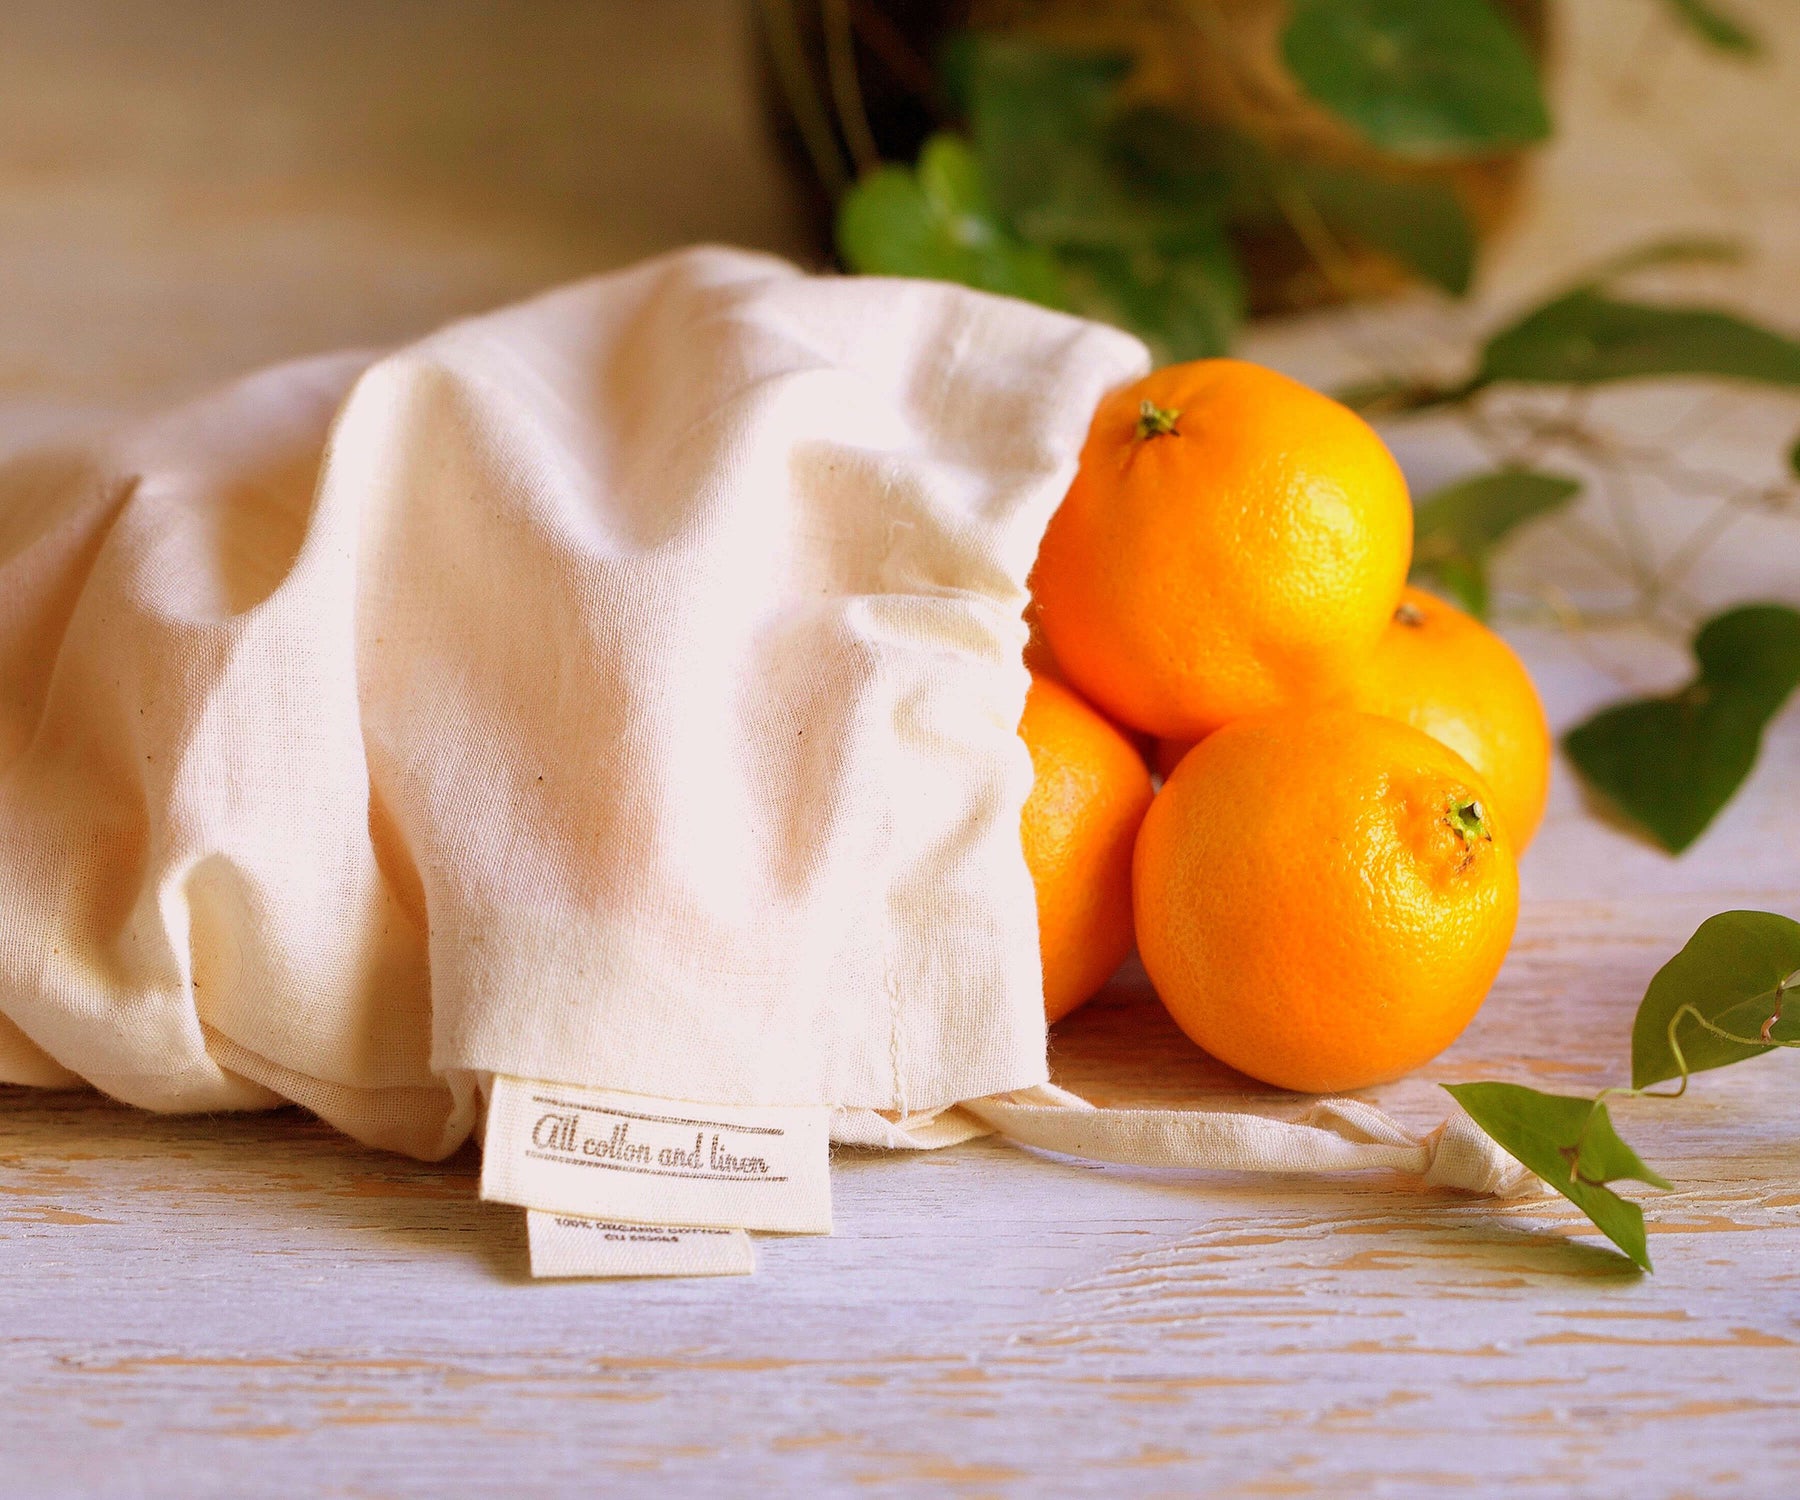 Make environmentally conscious choices by selecting muslin drawstring bags, cotton muslin bags, cotton mesh produce bags, and reusable cotton produce bags, to promote sustainability and reduce waste in packaging and storage practices.